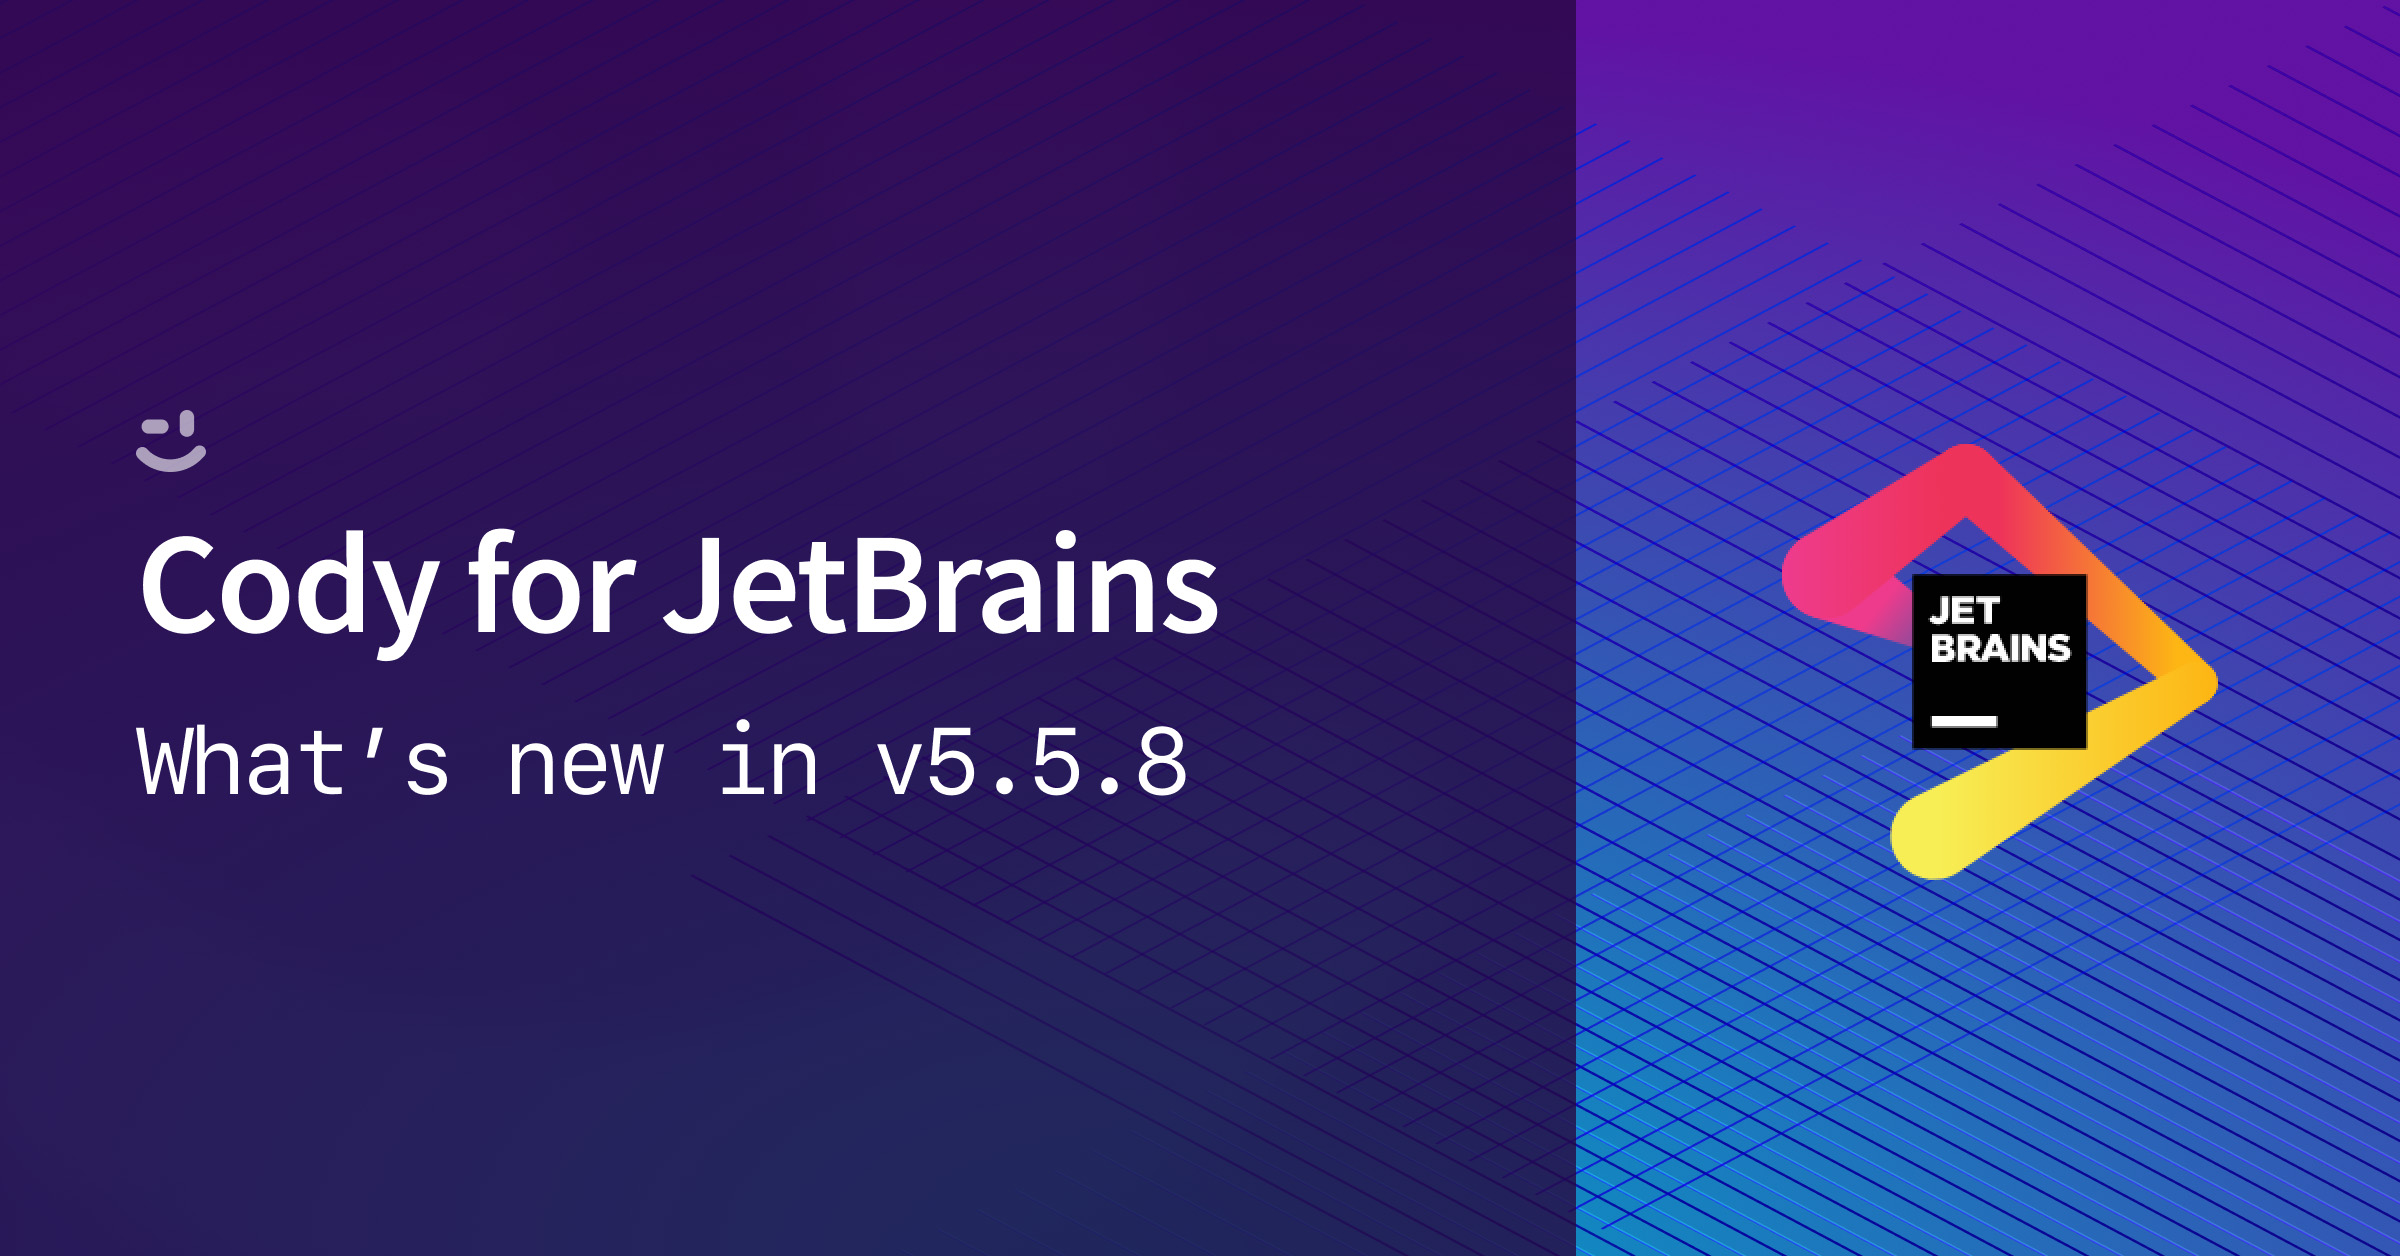 Cody for JetBrains v5.5.8: Context selector updates, larger context windows, and bug fixes for Apple silicon